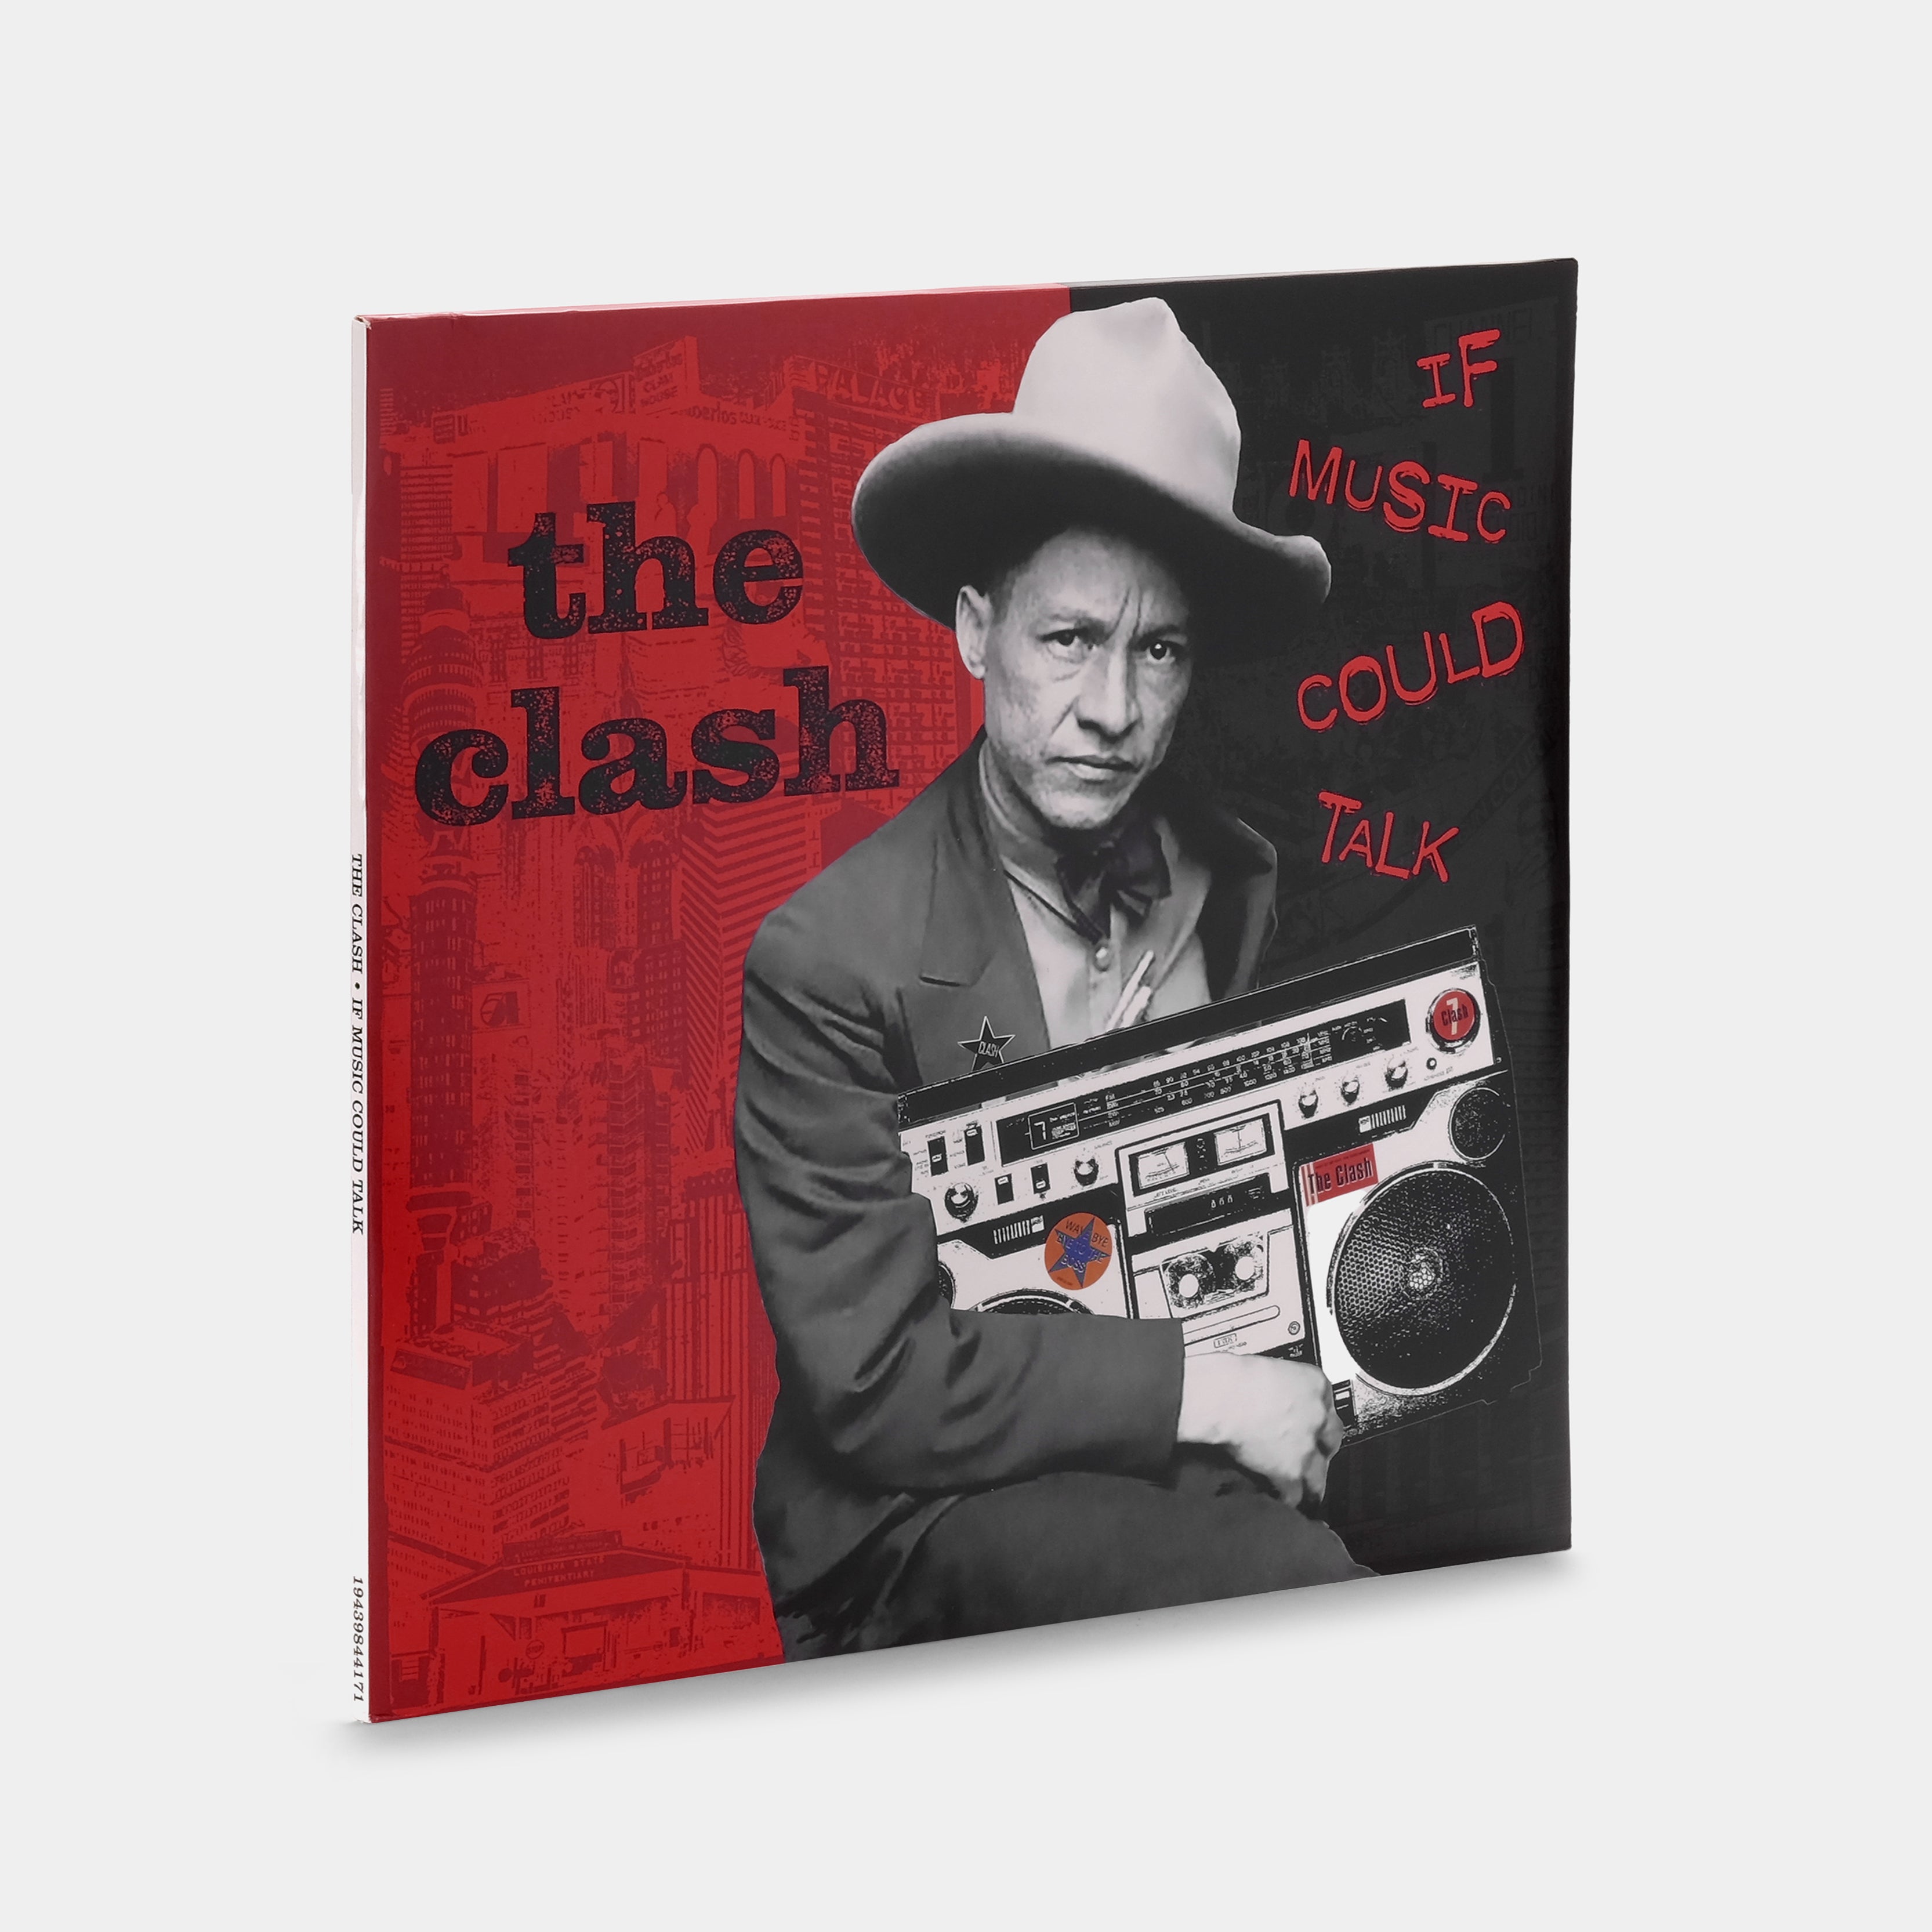 The Clash - If Music Could Talk 2xLP Vinyl Record